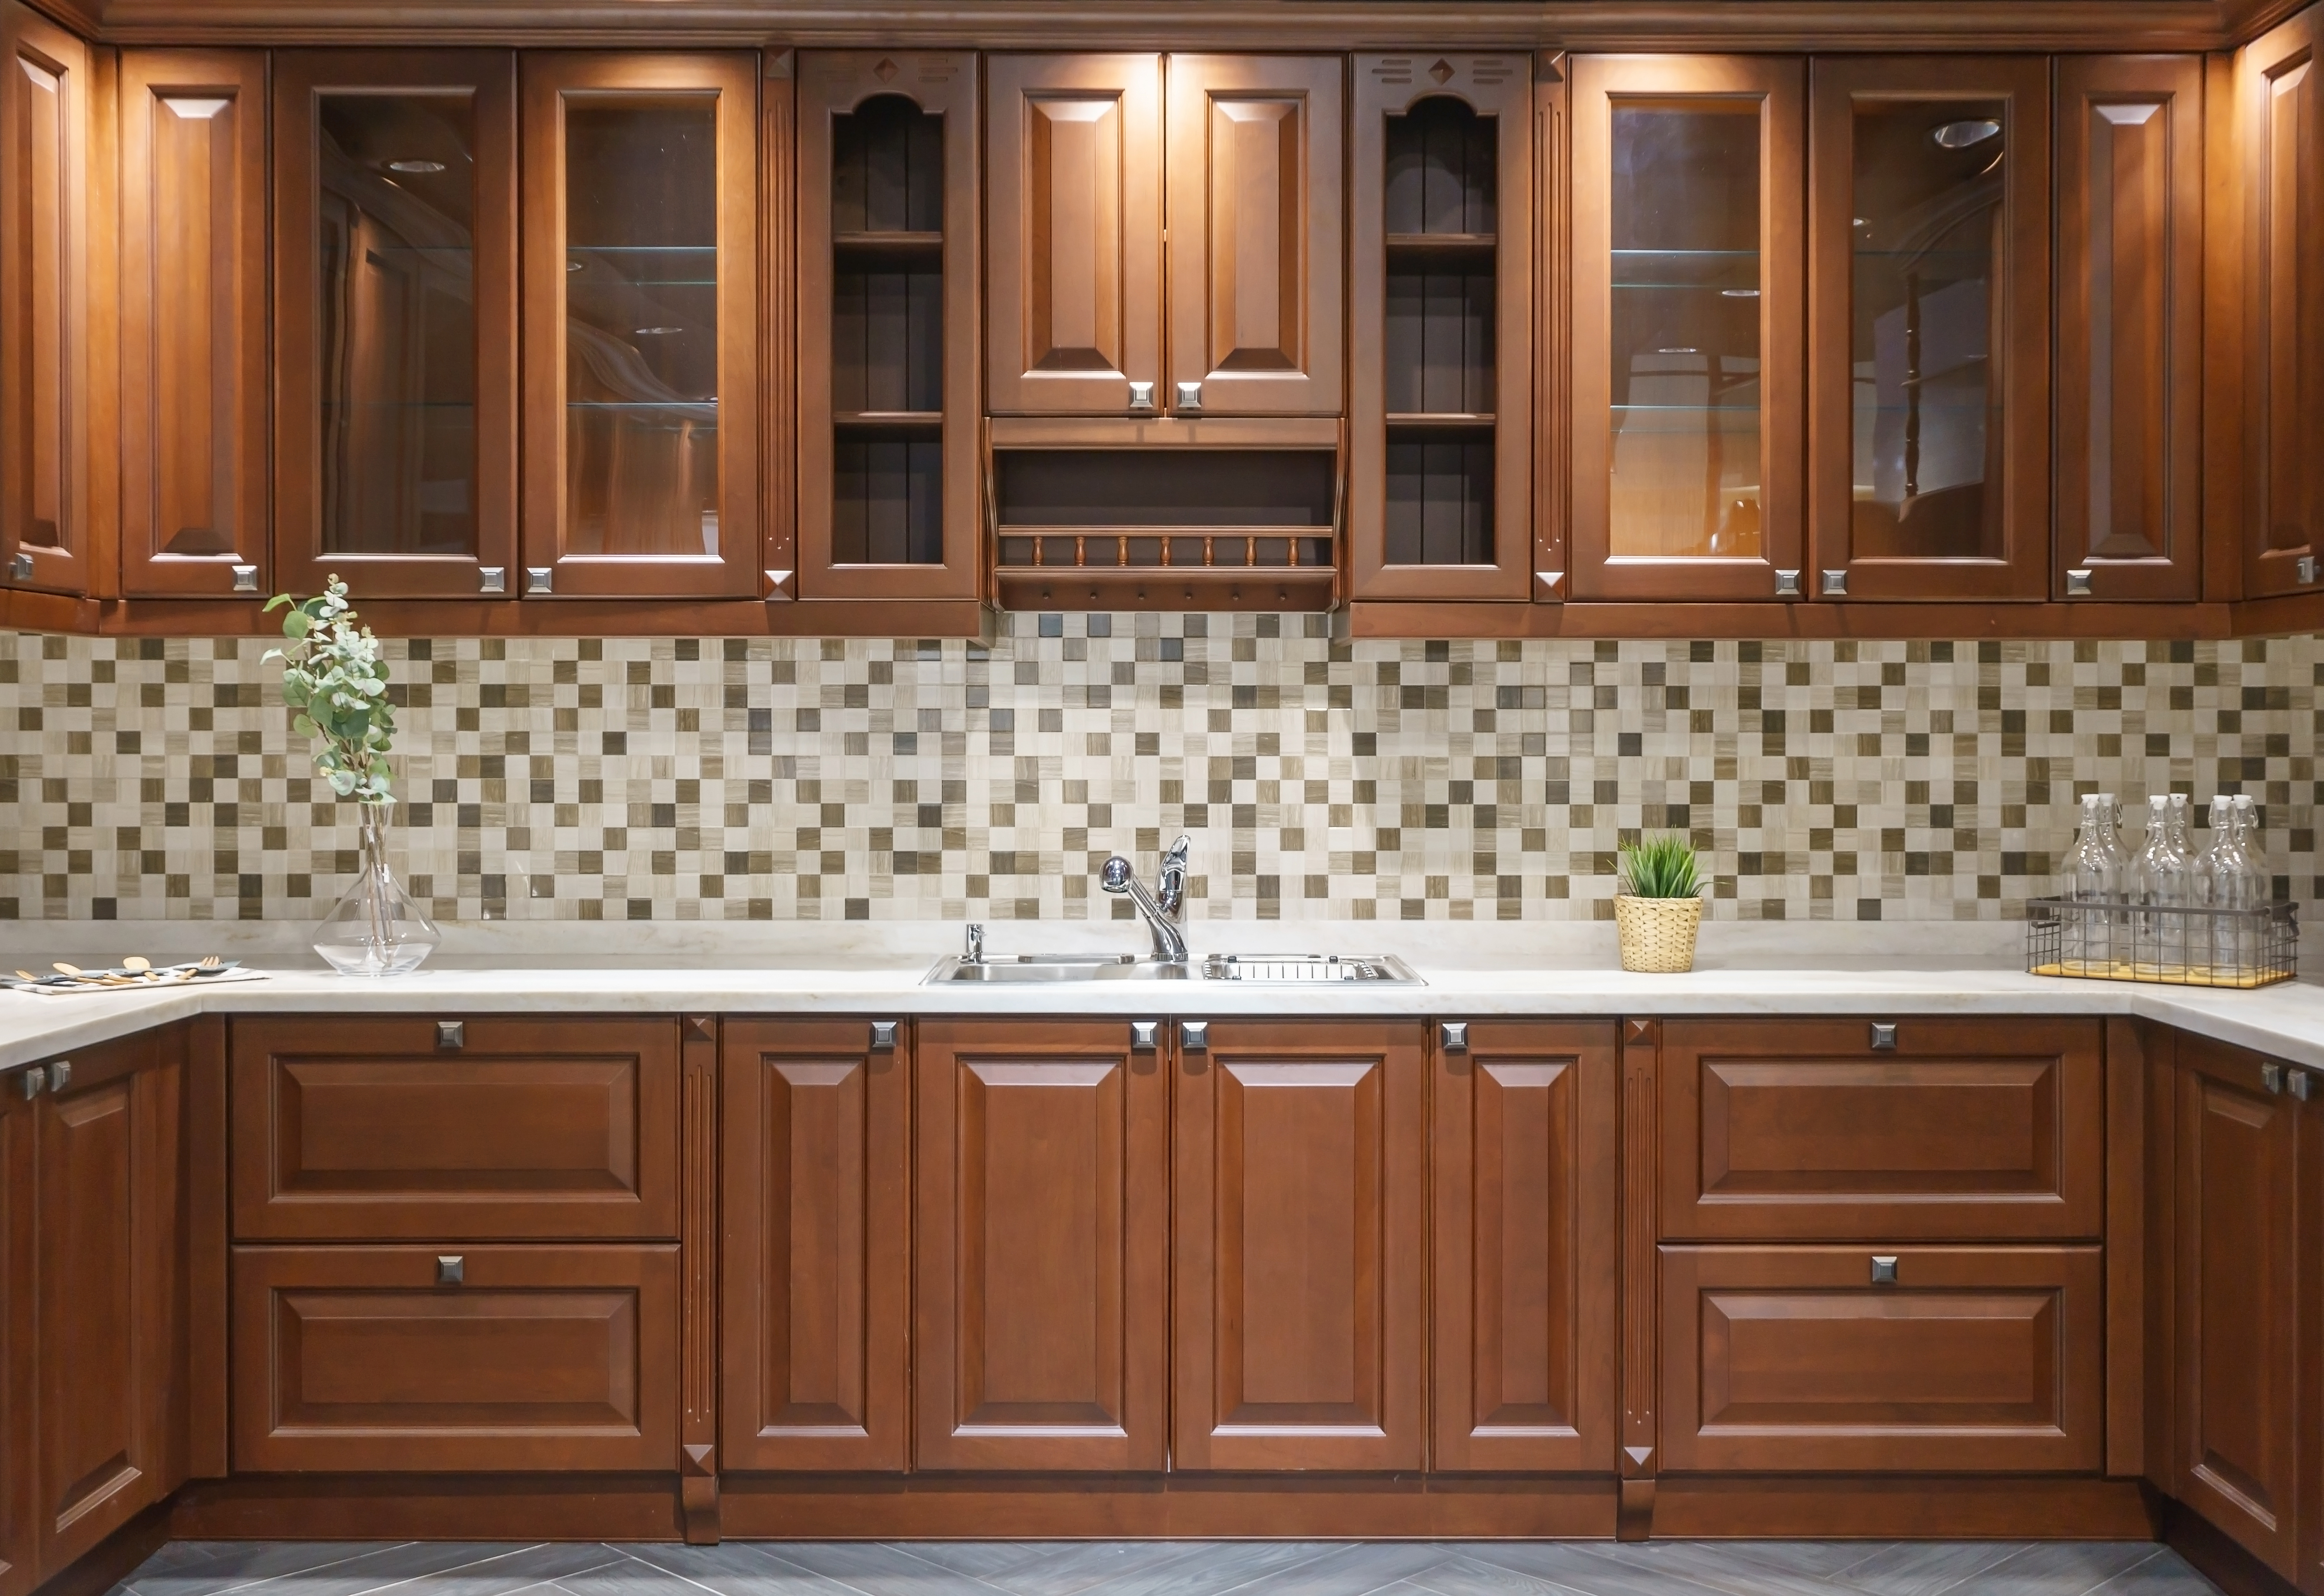 Wood counters and floors with tile backsplash in modern kitchen